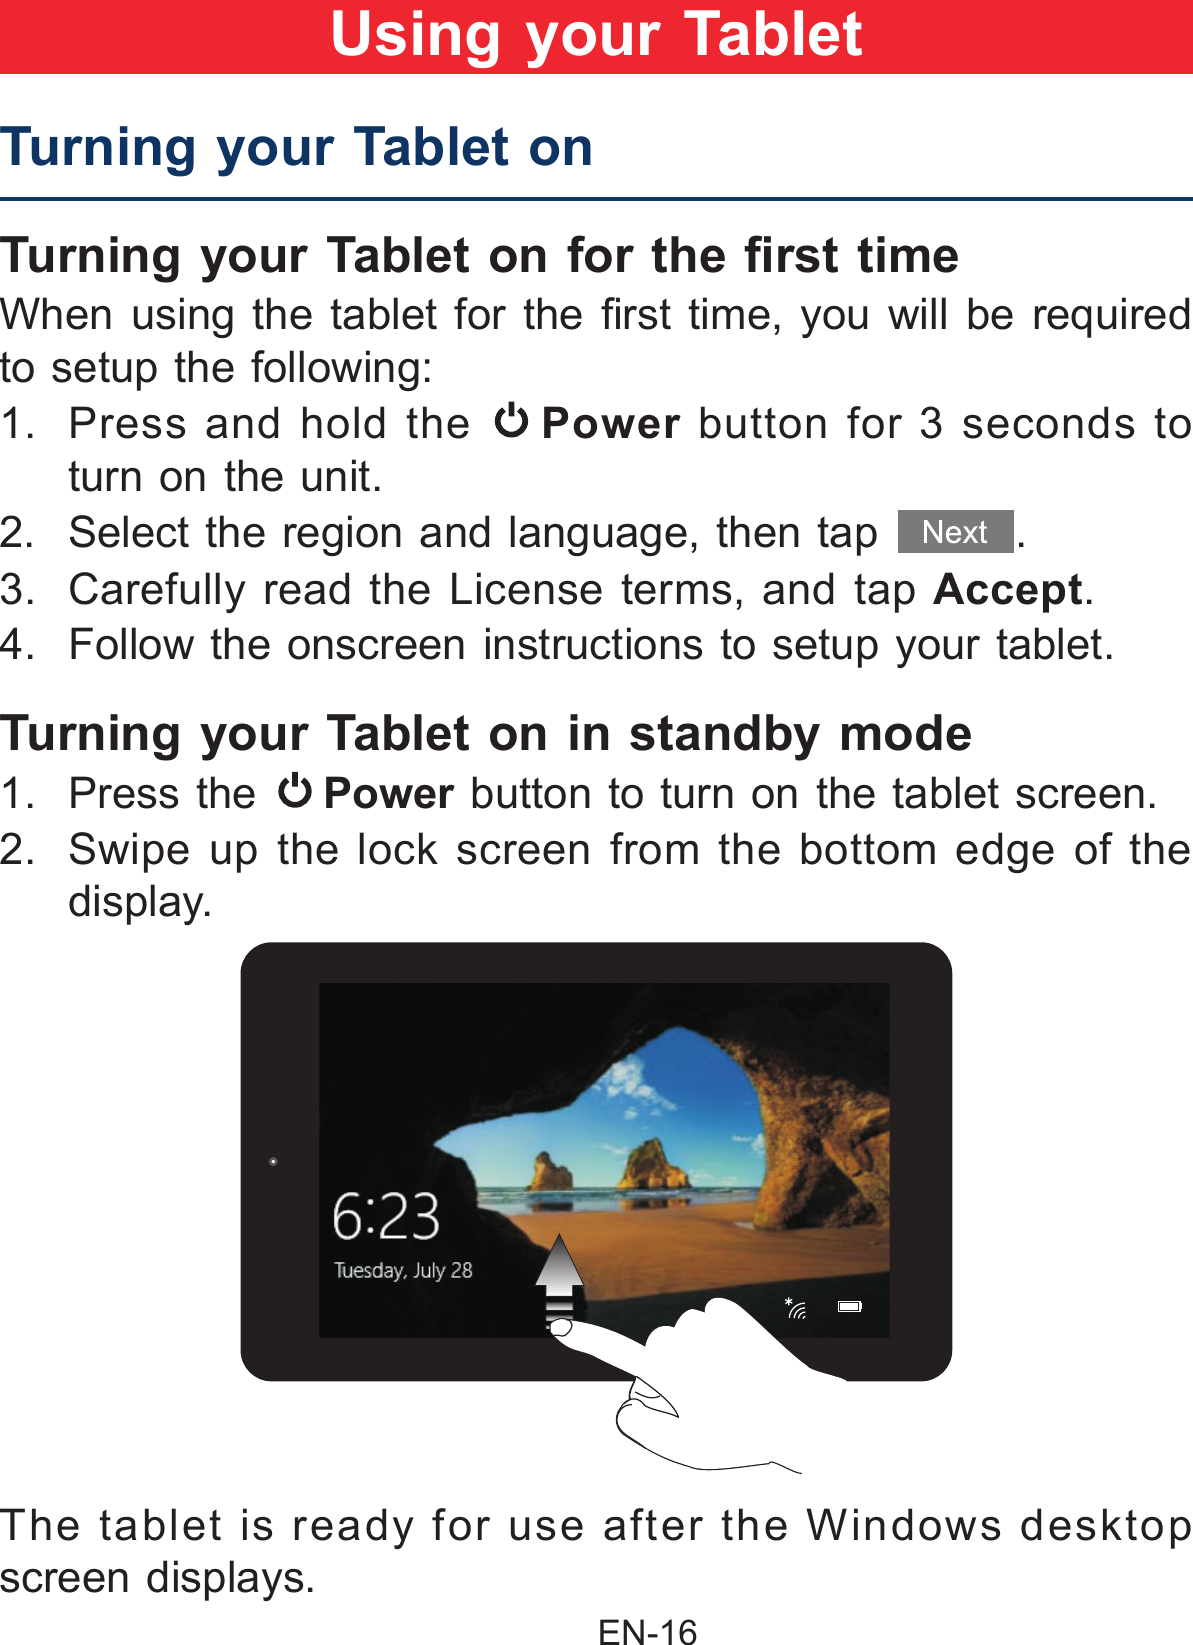                                                EN-16 Turning your Tablet onTurning your Tablet on for the rst time When using  the tablet  for  the rst  time, you  will  be required to setup the following:  1. Press and hold the  Power button for 3 seconds to turn on the unit.2.  Select the region and language, then tap  .3.  Carefully read the License terms, and tap Accept.4.  Follow the onscreen instructions to setup your tablet. Turning your Tablet on in standby mode 1. Press the  Power button to turn on the tablet screen.2.  Swipe up the lock screen from the bottom edge of the display.Using your TabletThe tablet is ready for use after the Windows desktop screen displays.